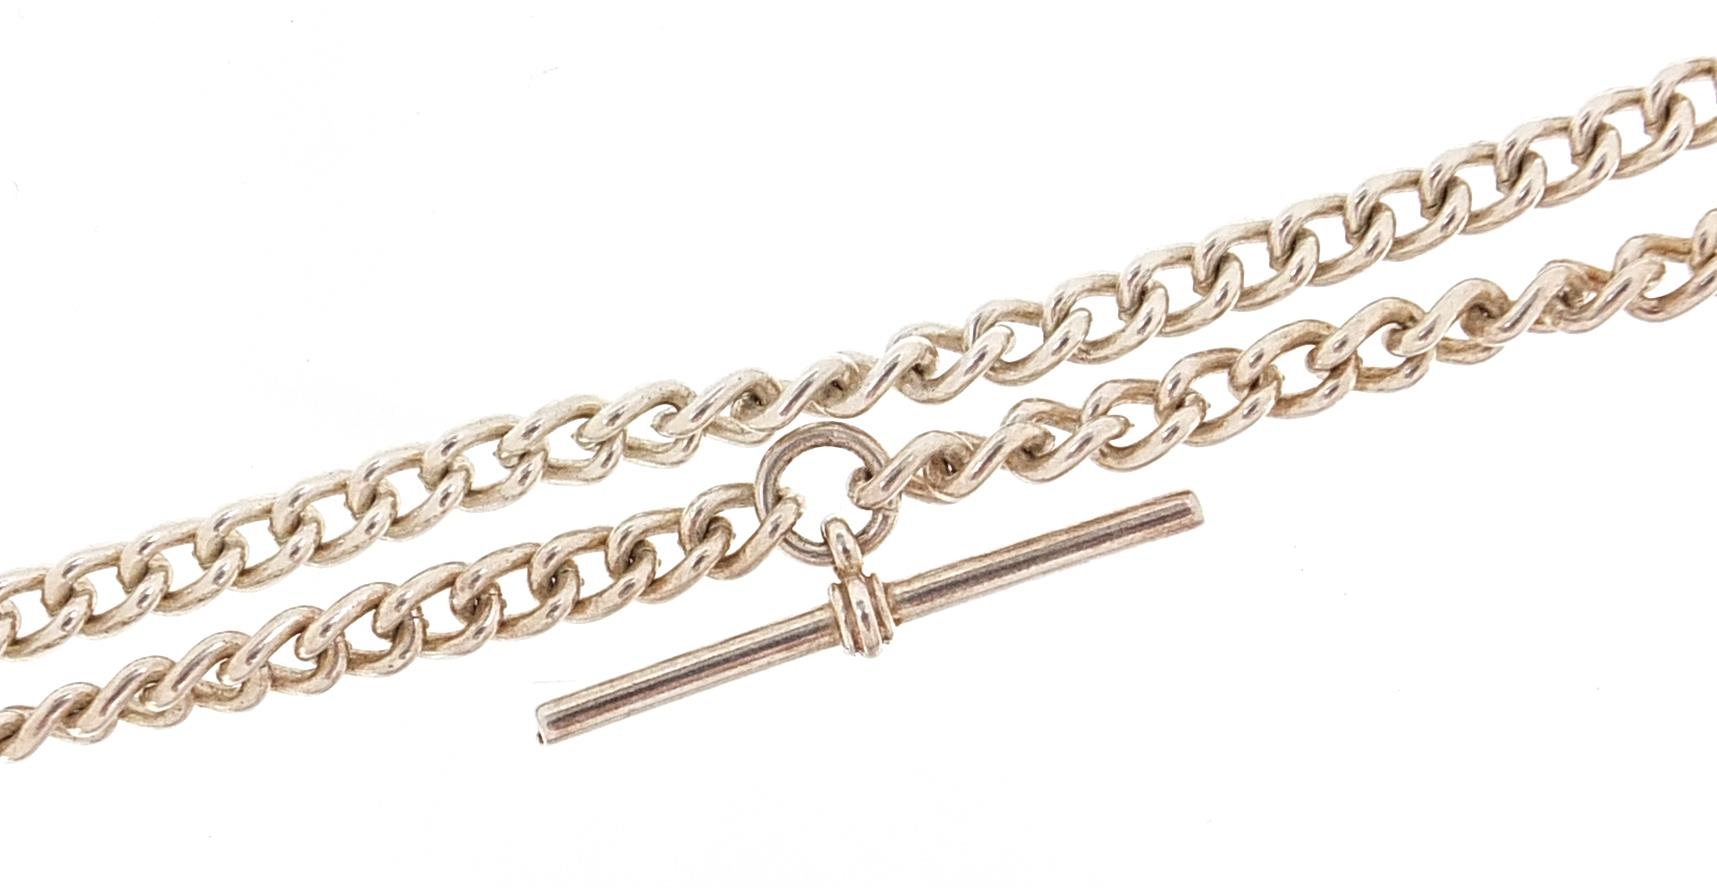 Silver watch chain with T bar, 22cm in length, 32.5g